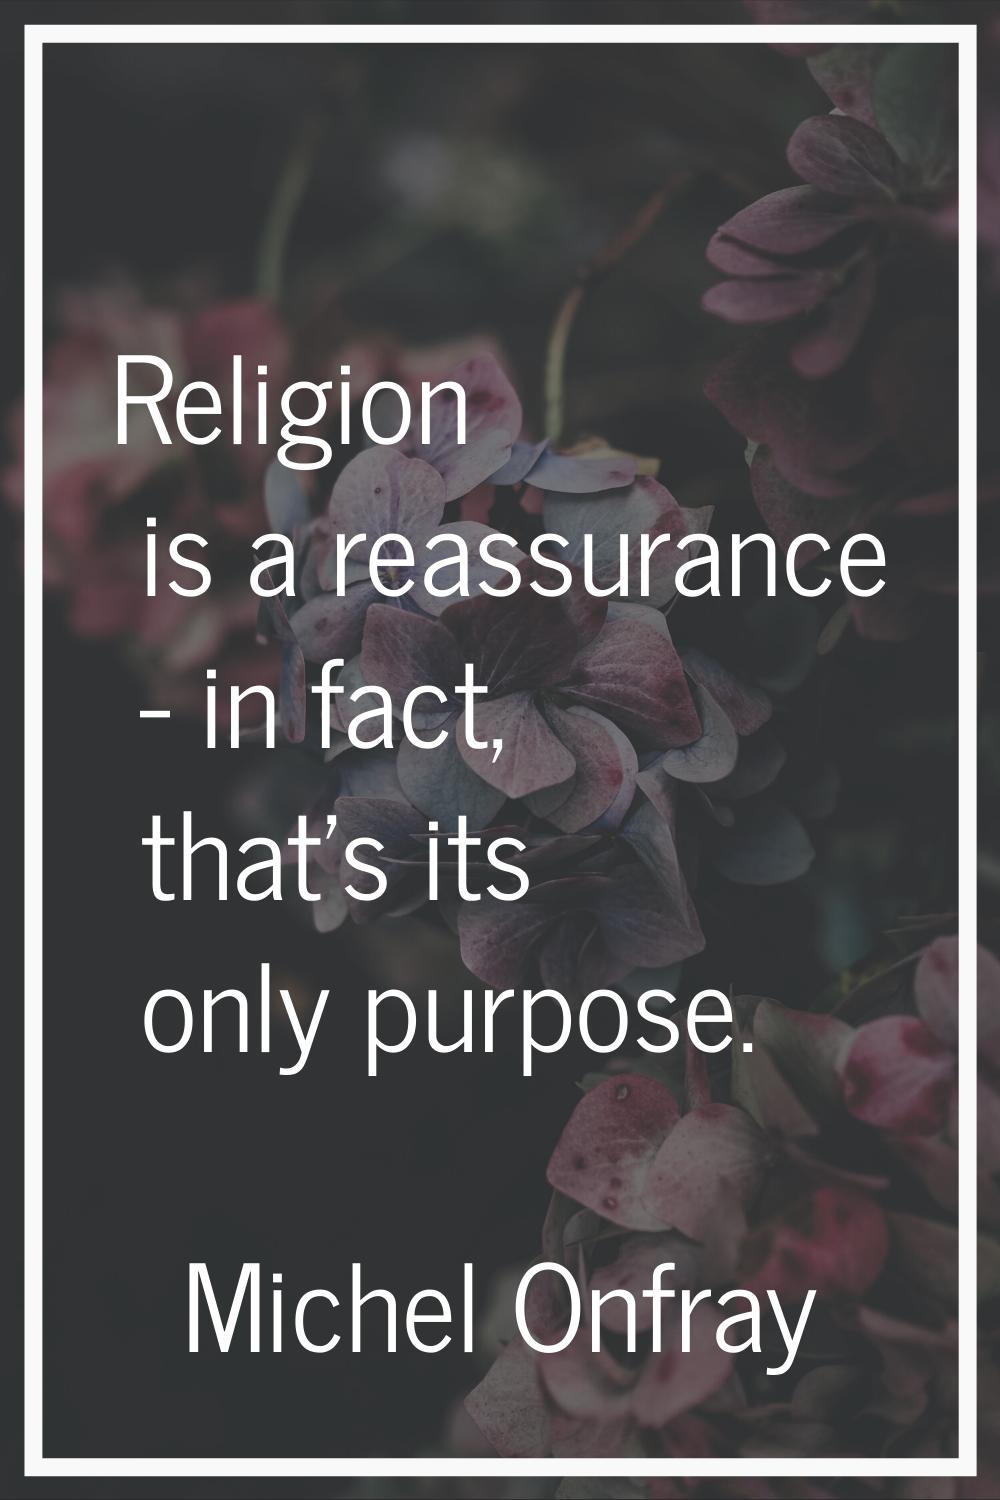 Religion is a reassurance - in fact, that's its only purpose.